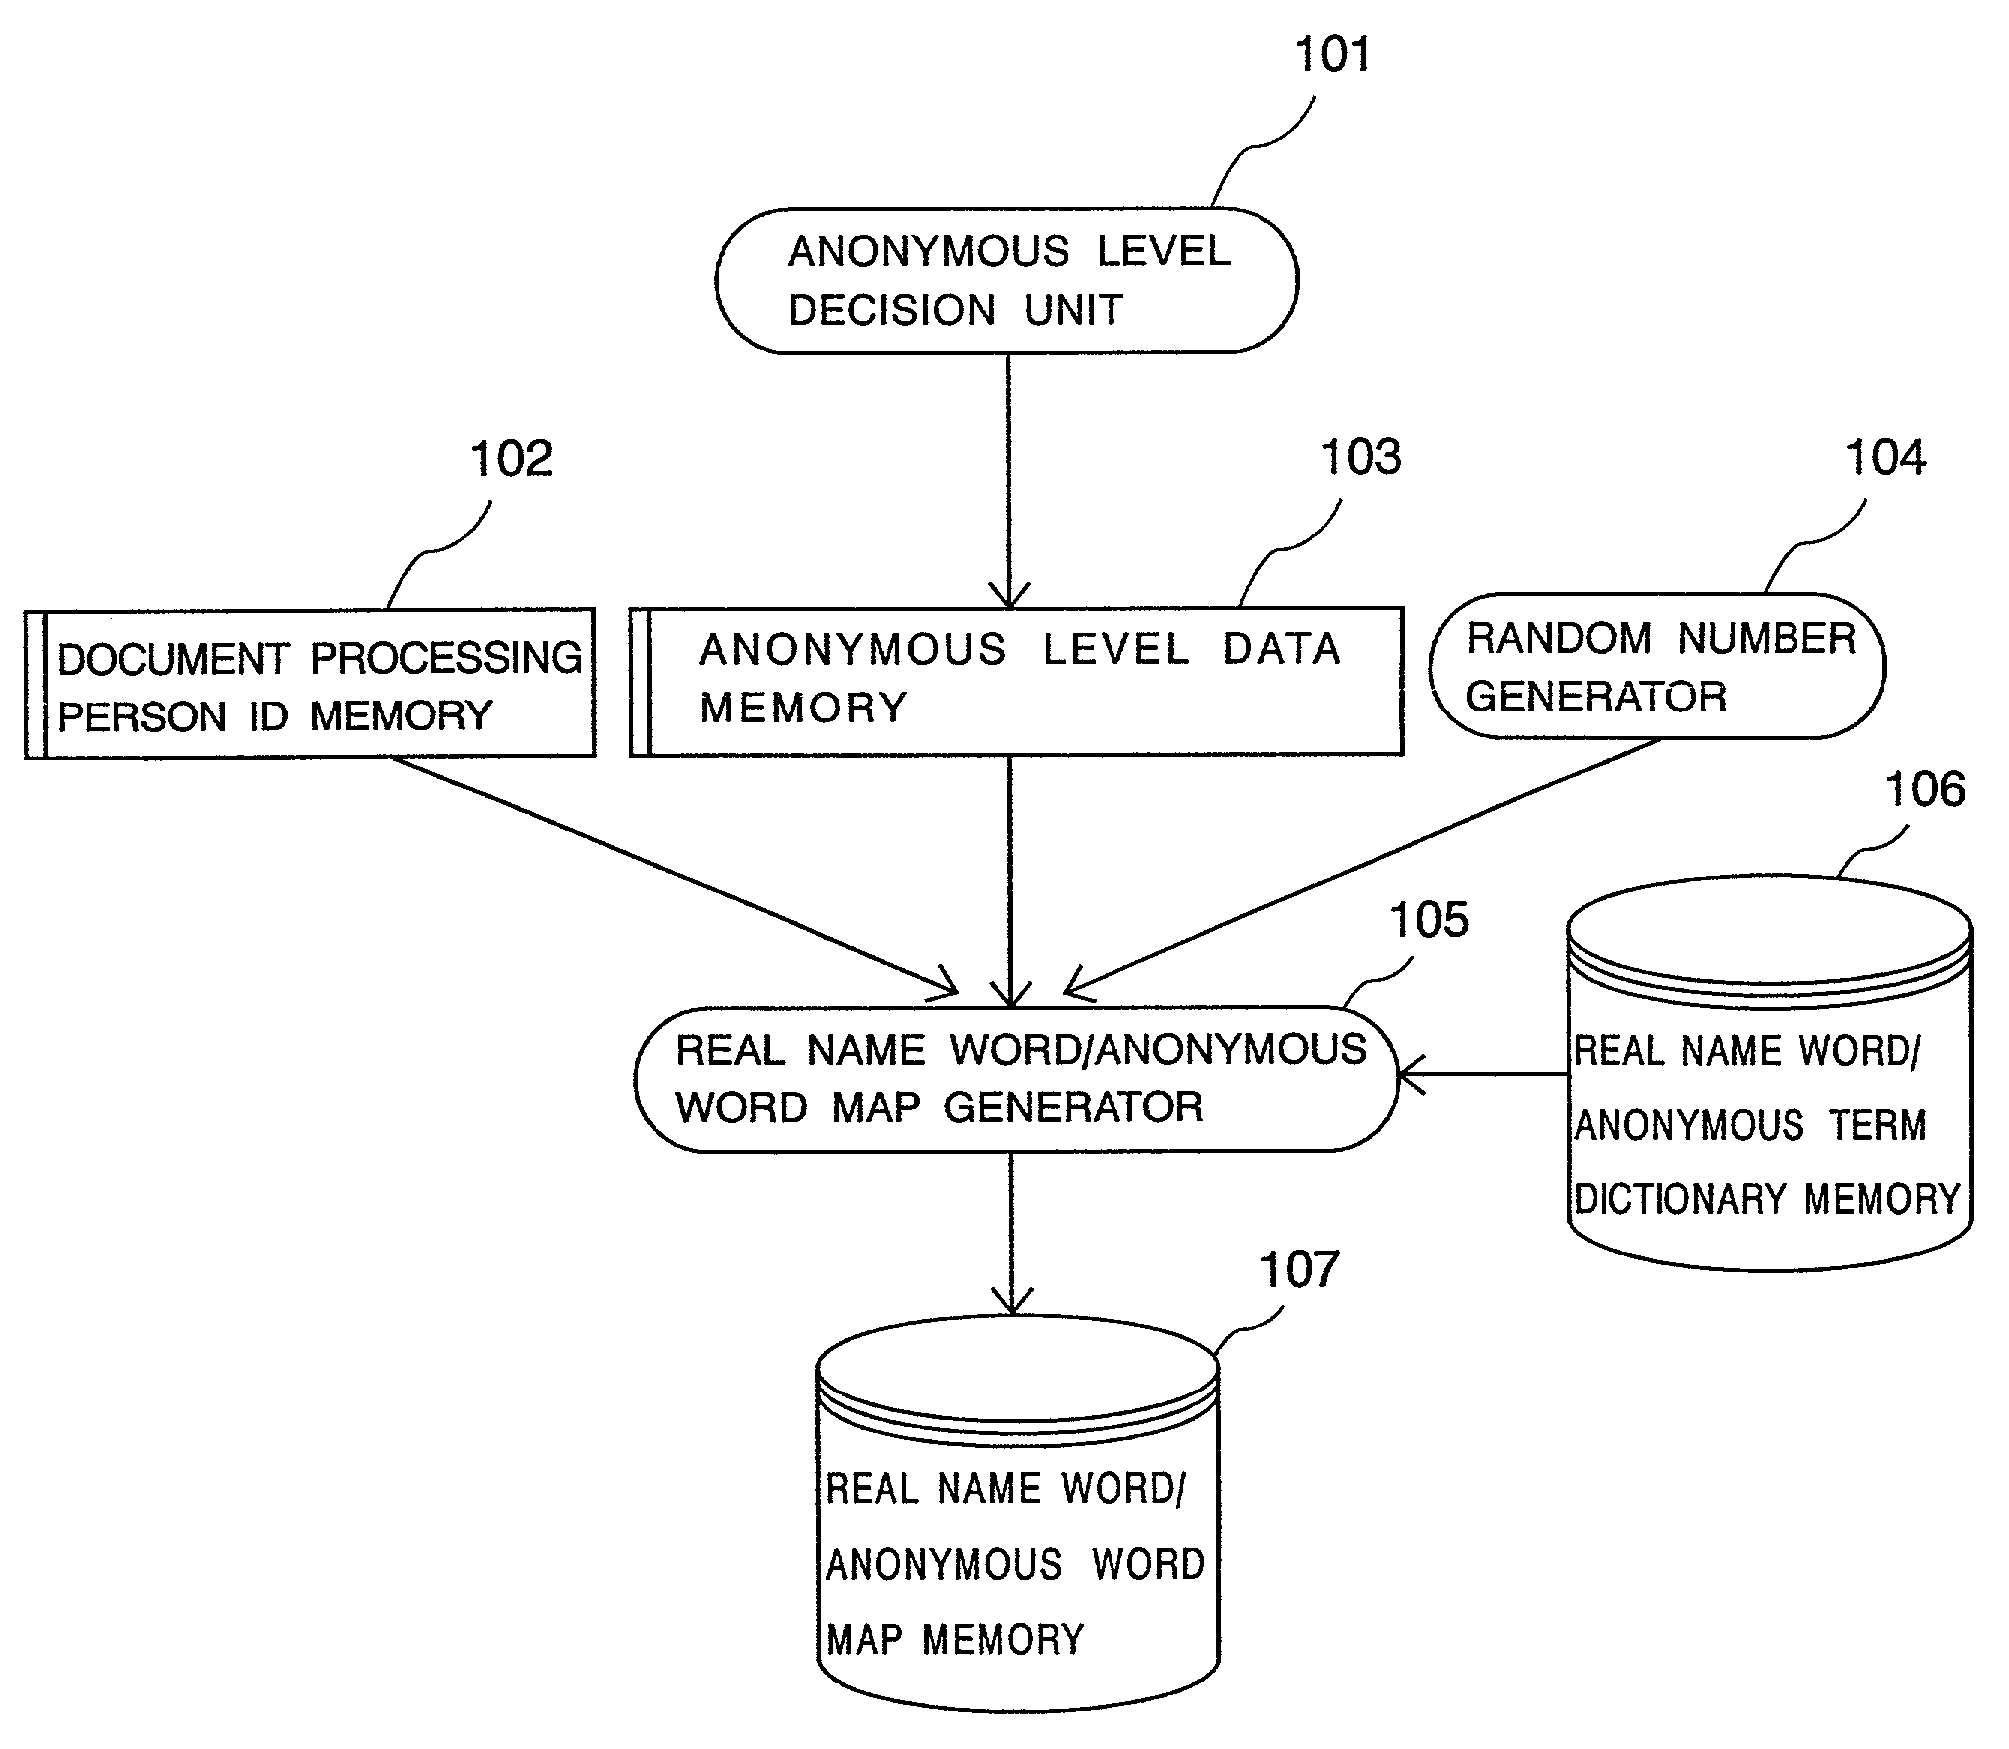 Apparatus and method for creating a map of a real name word to an anonymous word for an electronic document